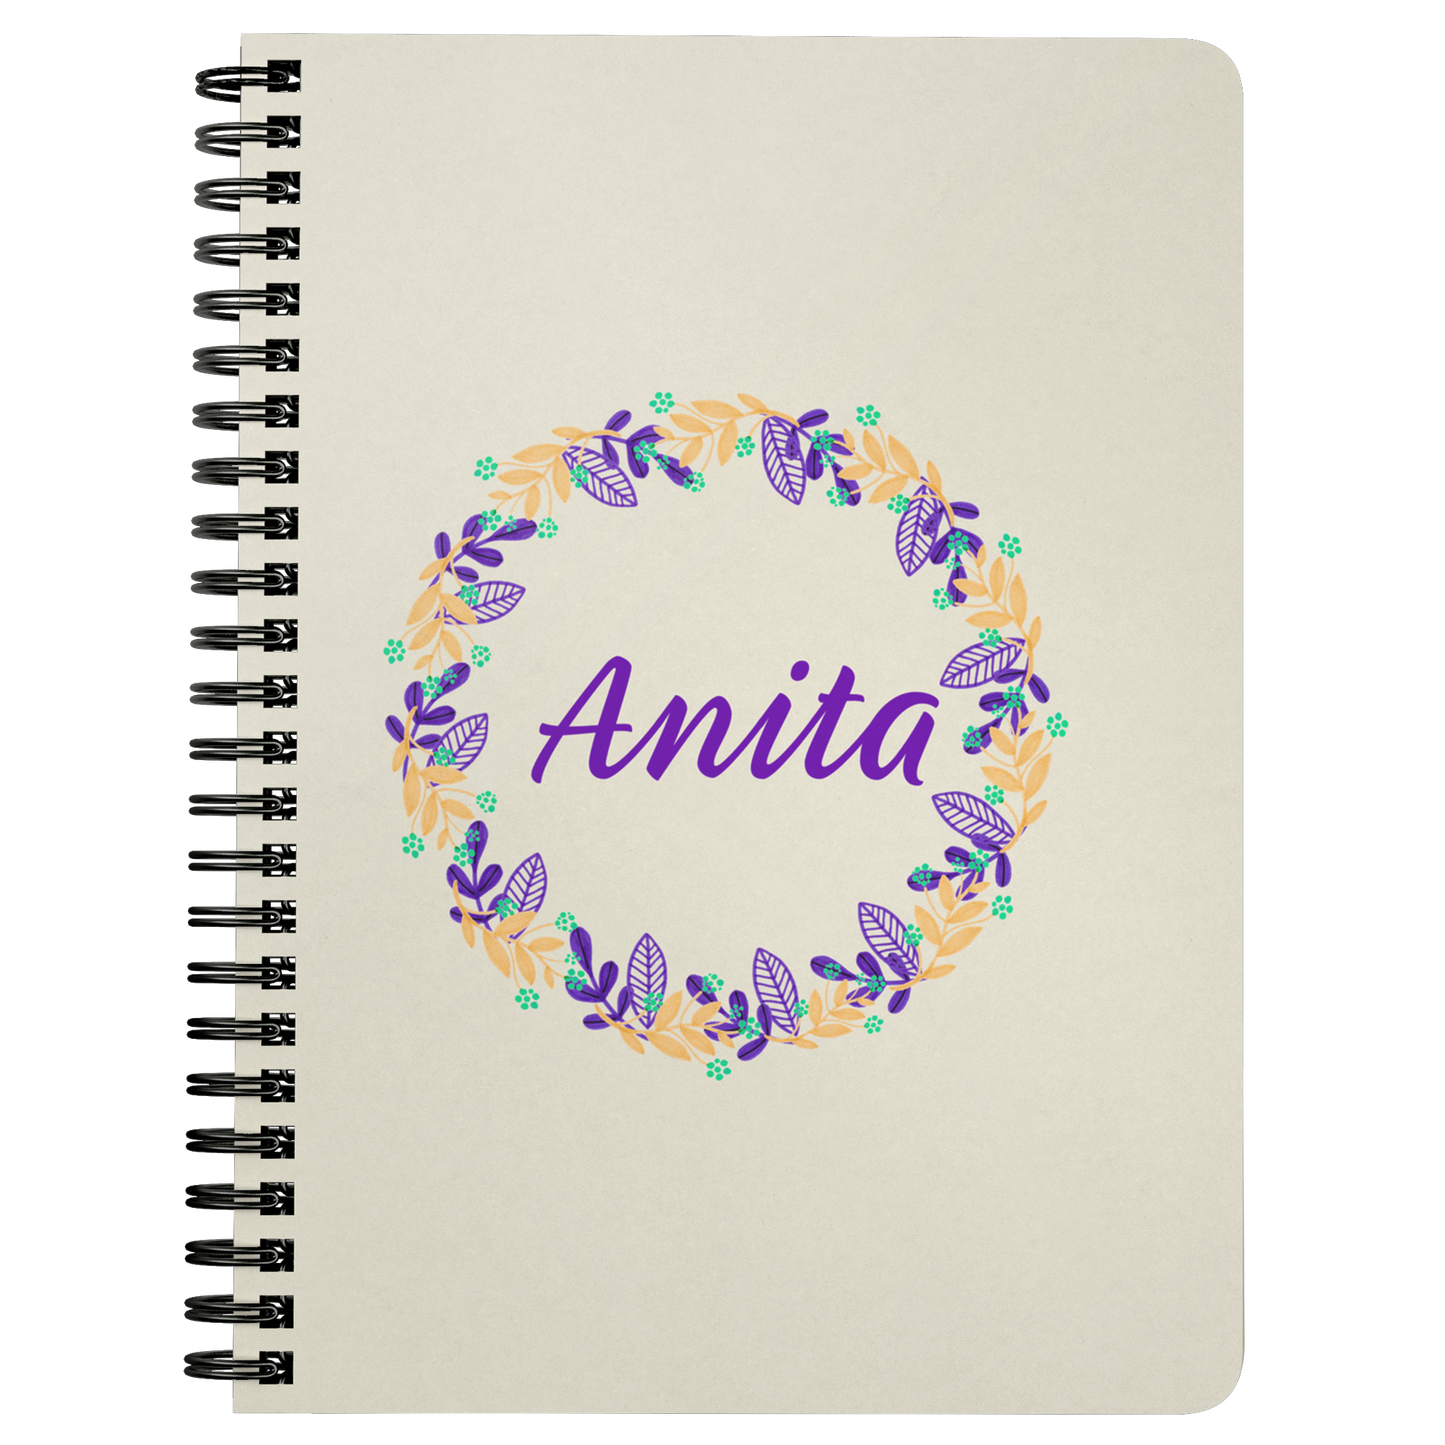 Personalize Notebook Journal Gift for Him or Her Spiraled Lined Journal Notebook, Diary,Daily Notebook